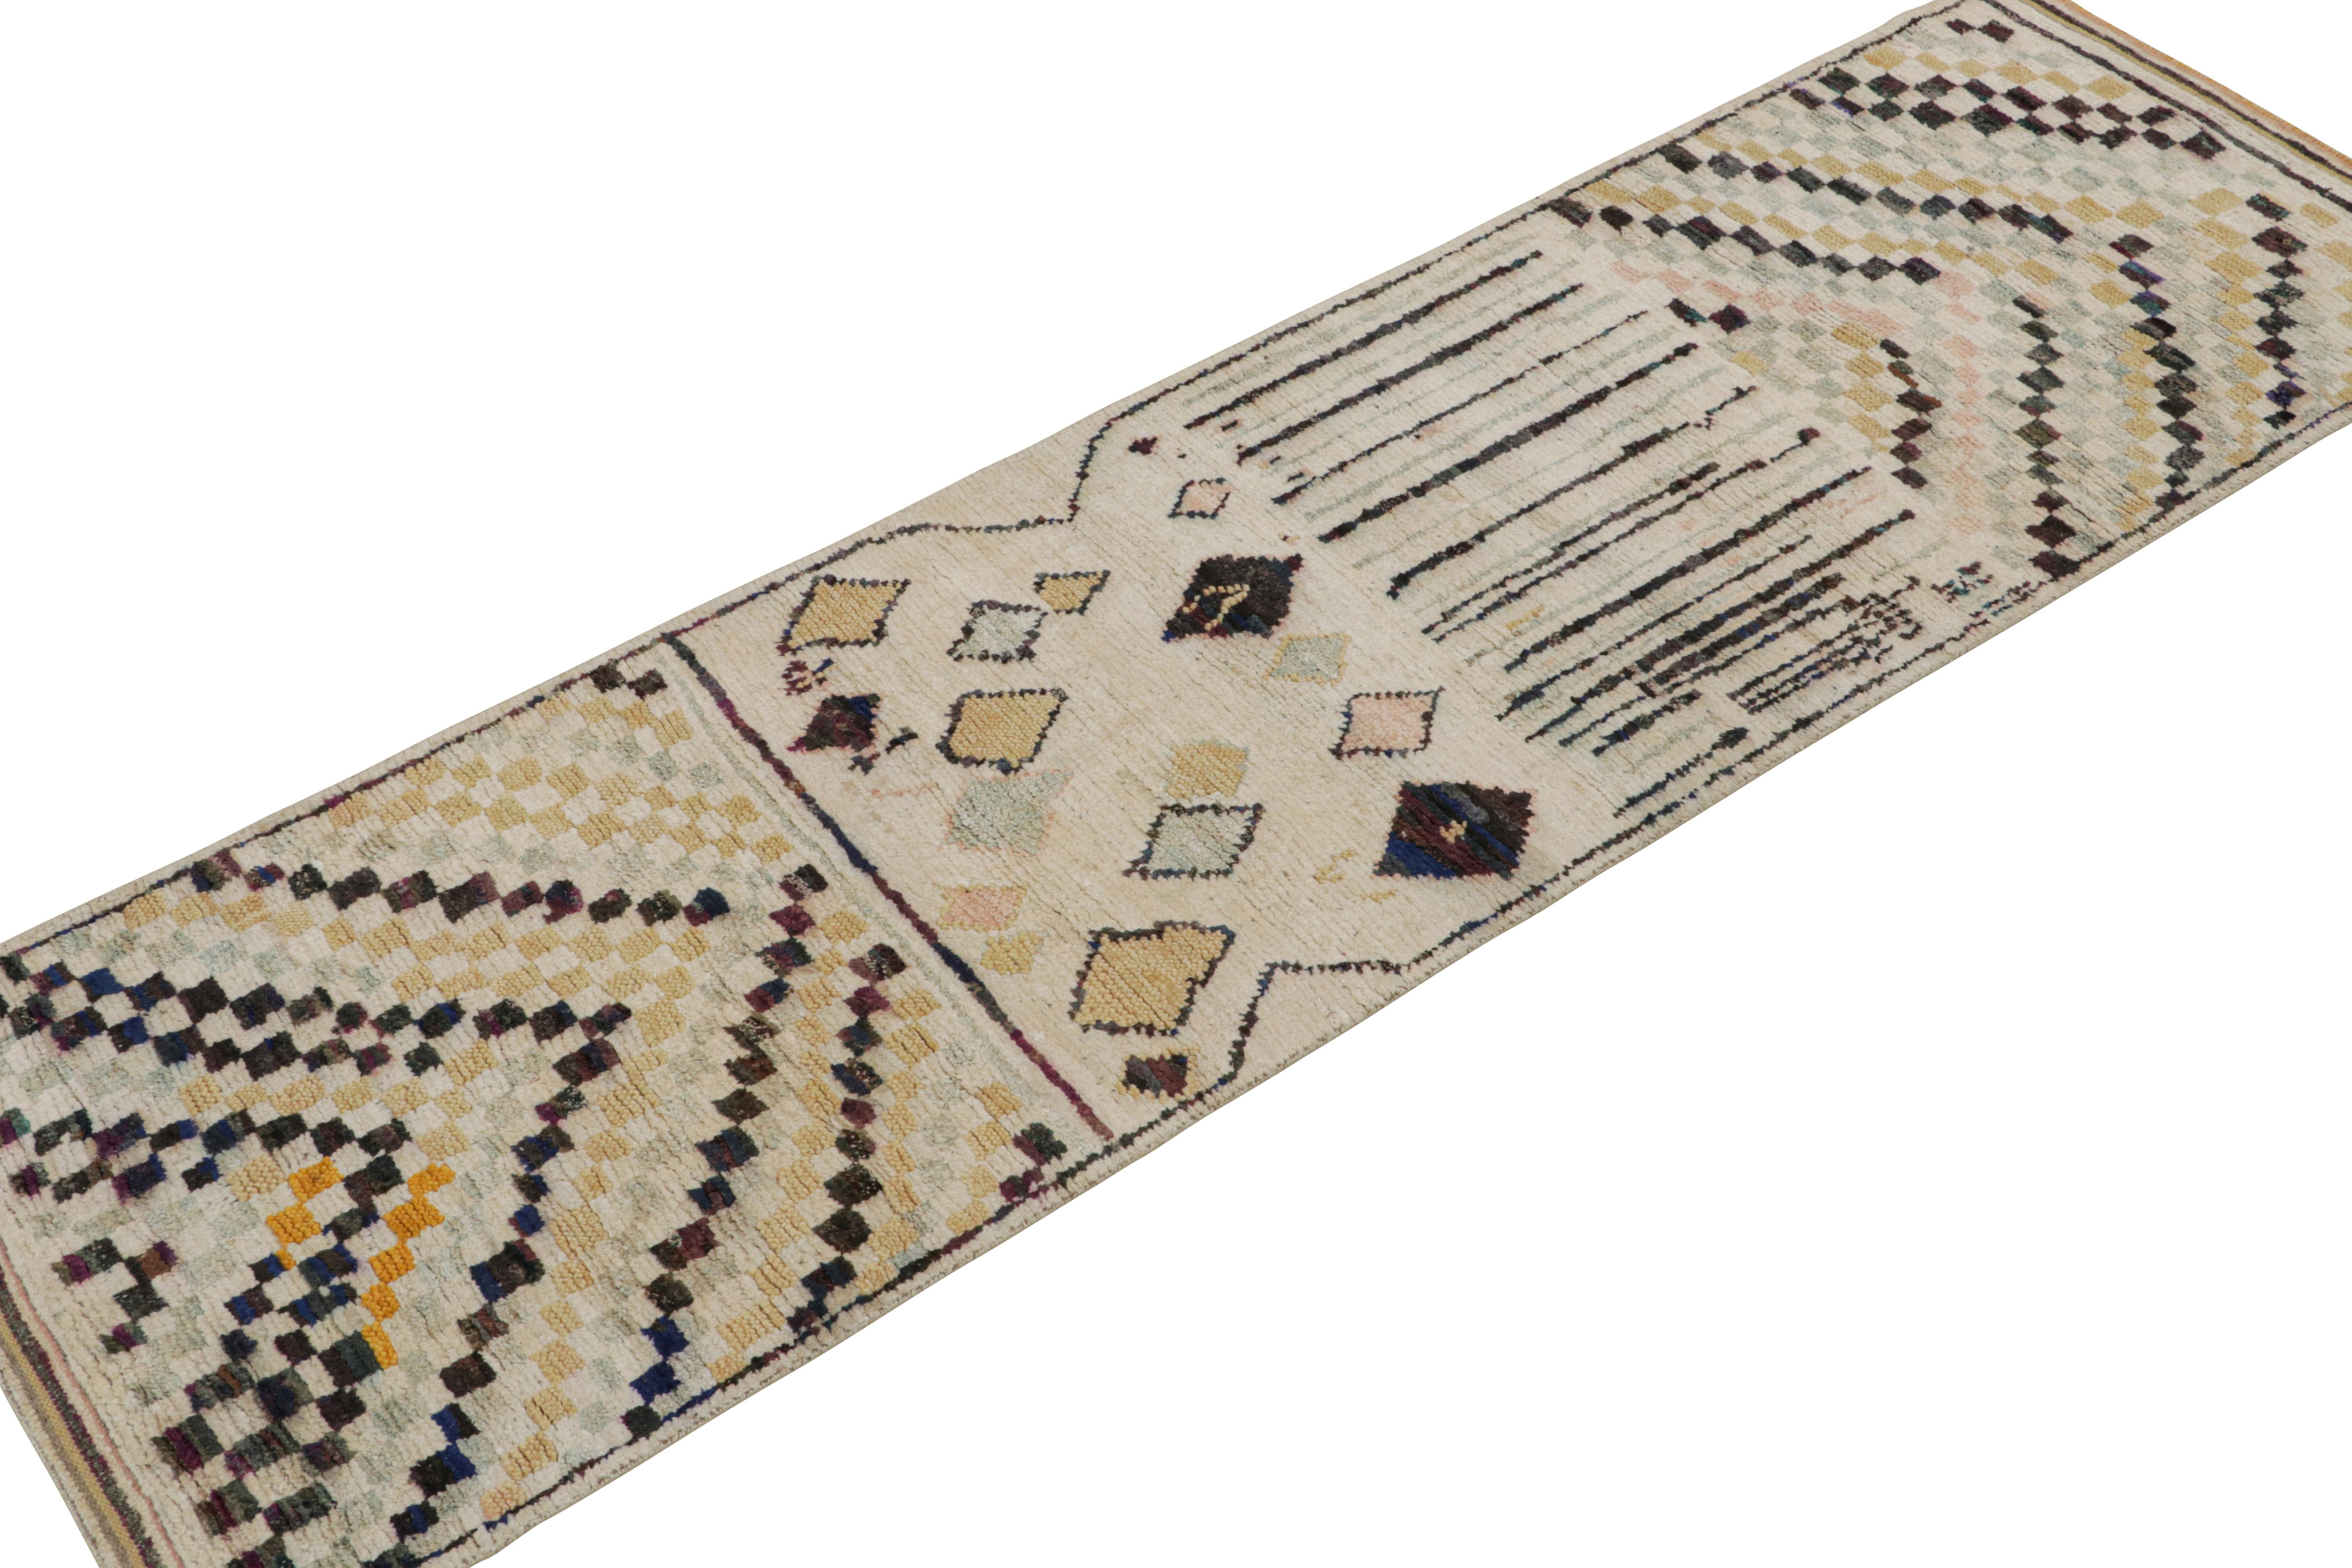 Hand-knotted in wool, silk and cotton, this 3x10 runner rug is a new addition to the Moroccan rug collection by Rug & Kilim. 

On the Design

This designs represent a modern take on the Berber primitivist style, with multicolor geometric patterns on